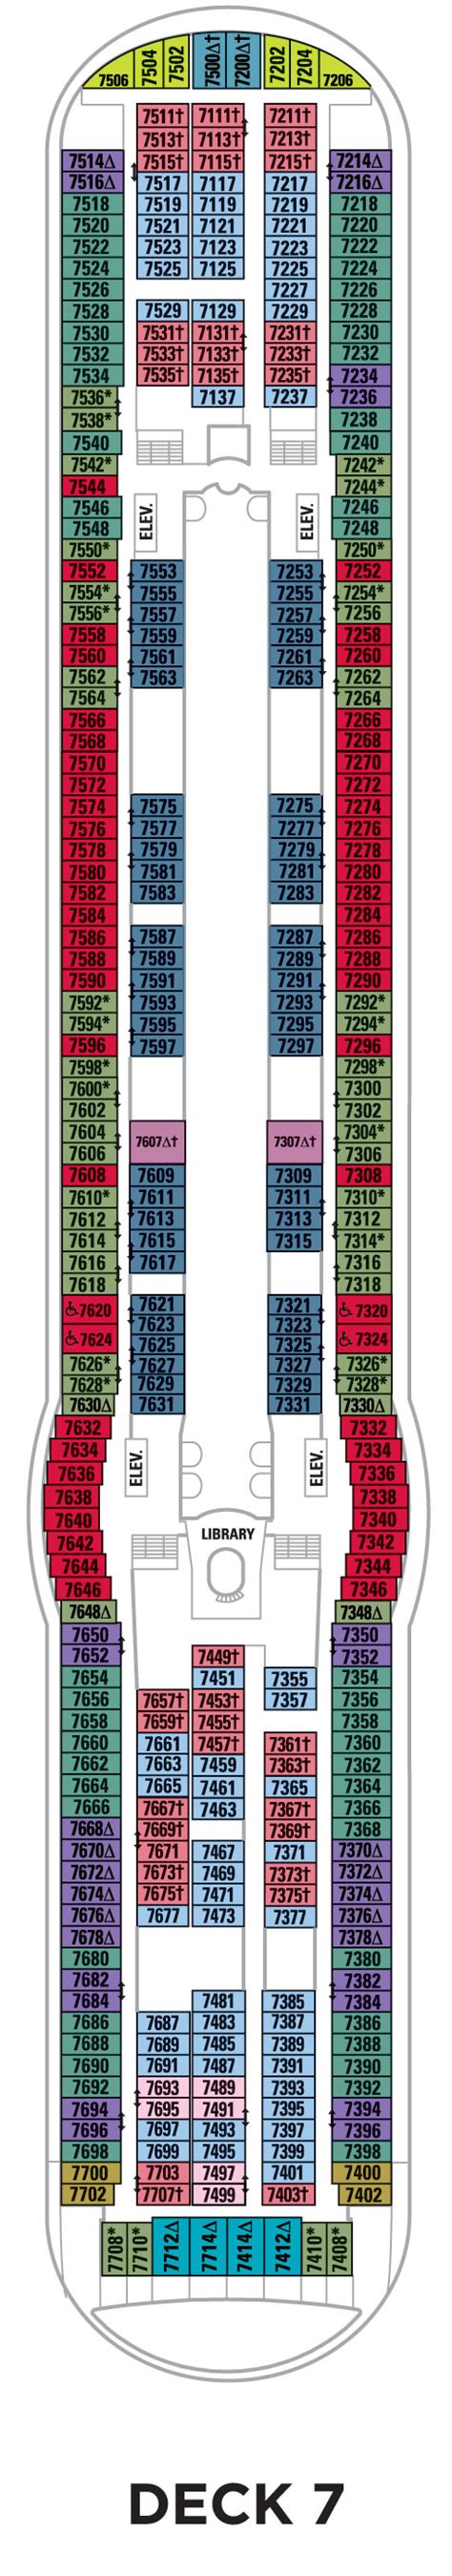 Stateroom with occupancy 5 and up. . Royal caribbean liberty of the seas deck plan